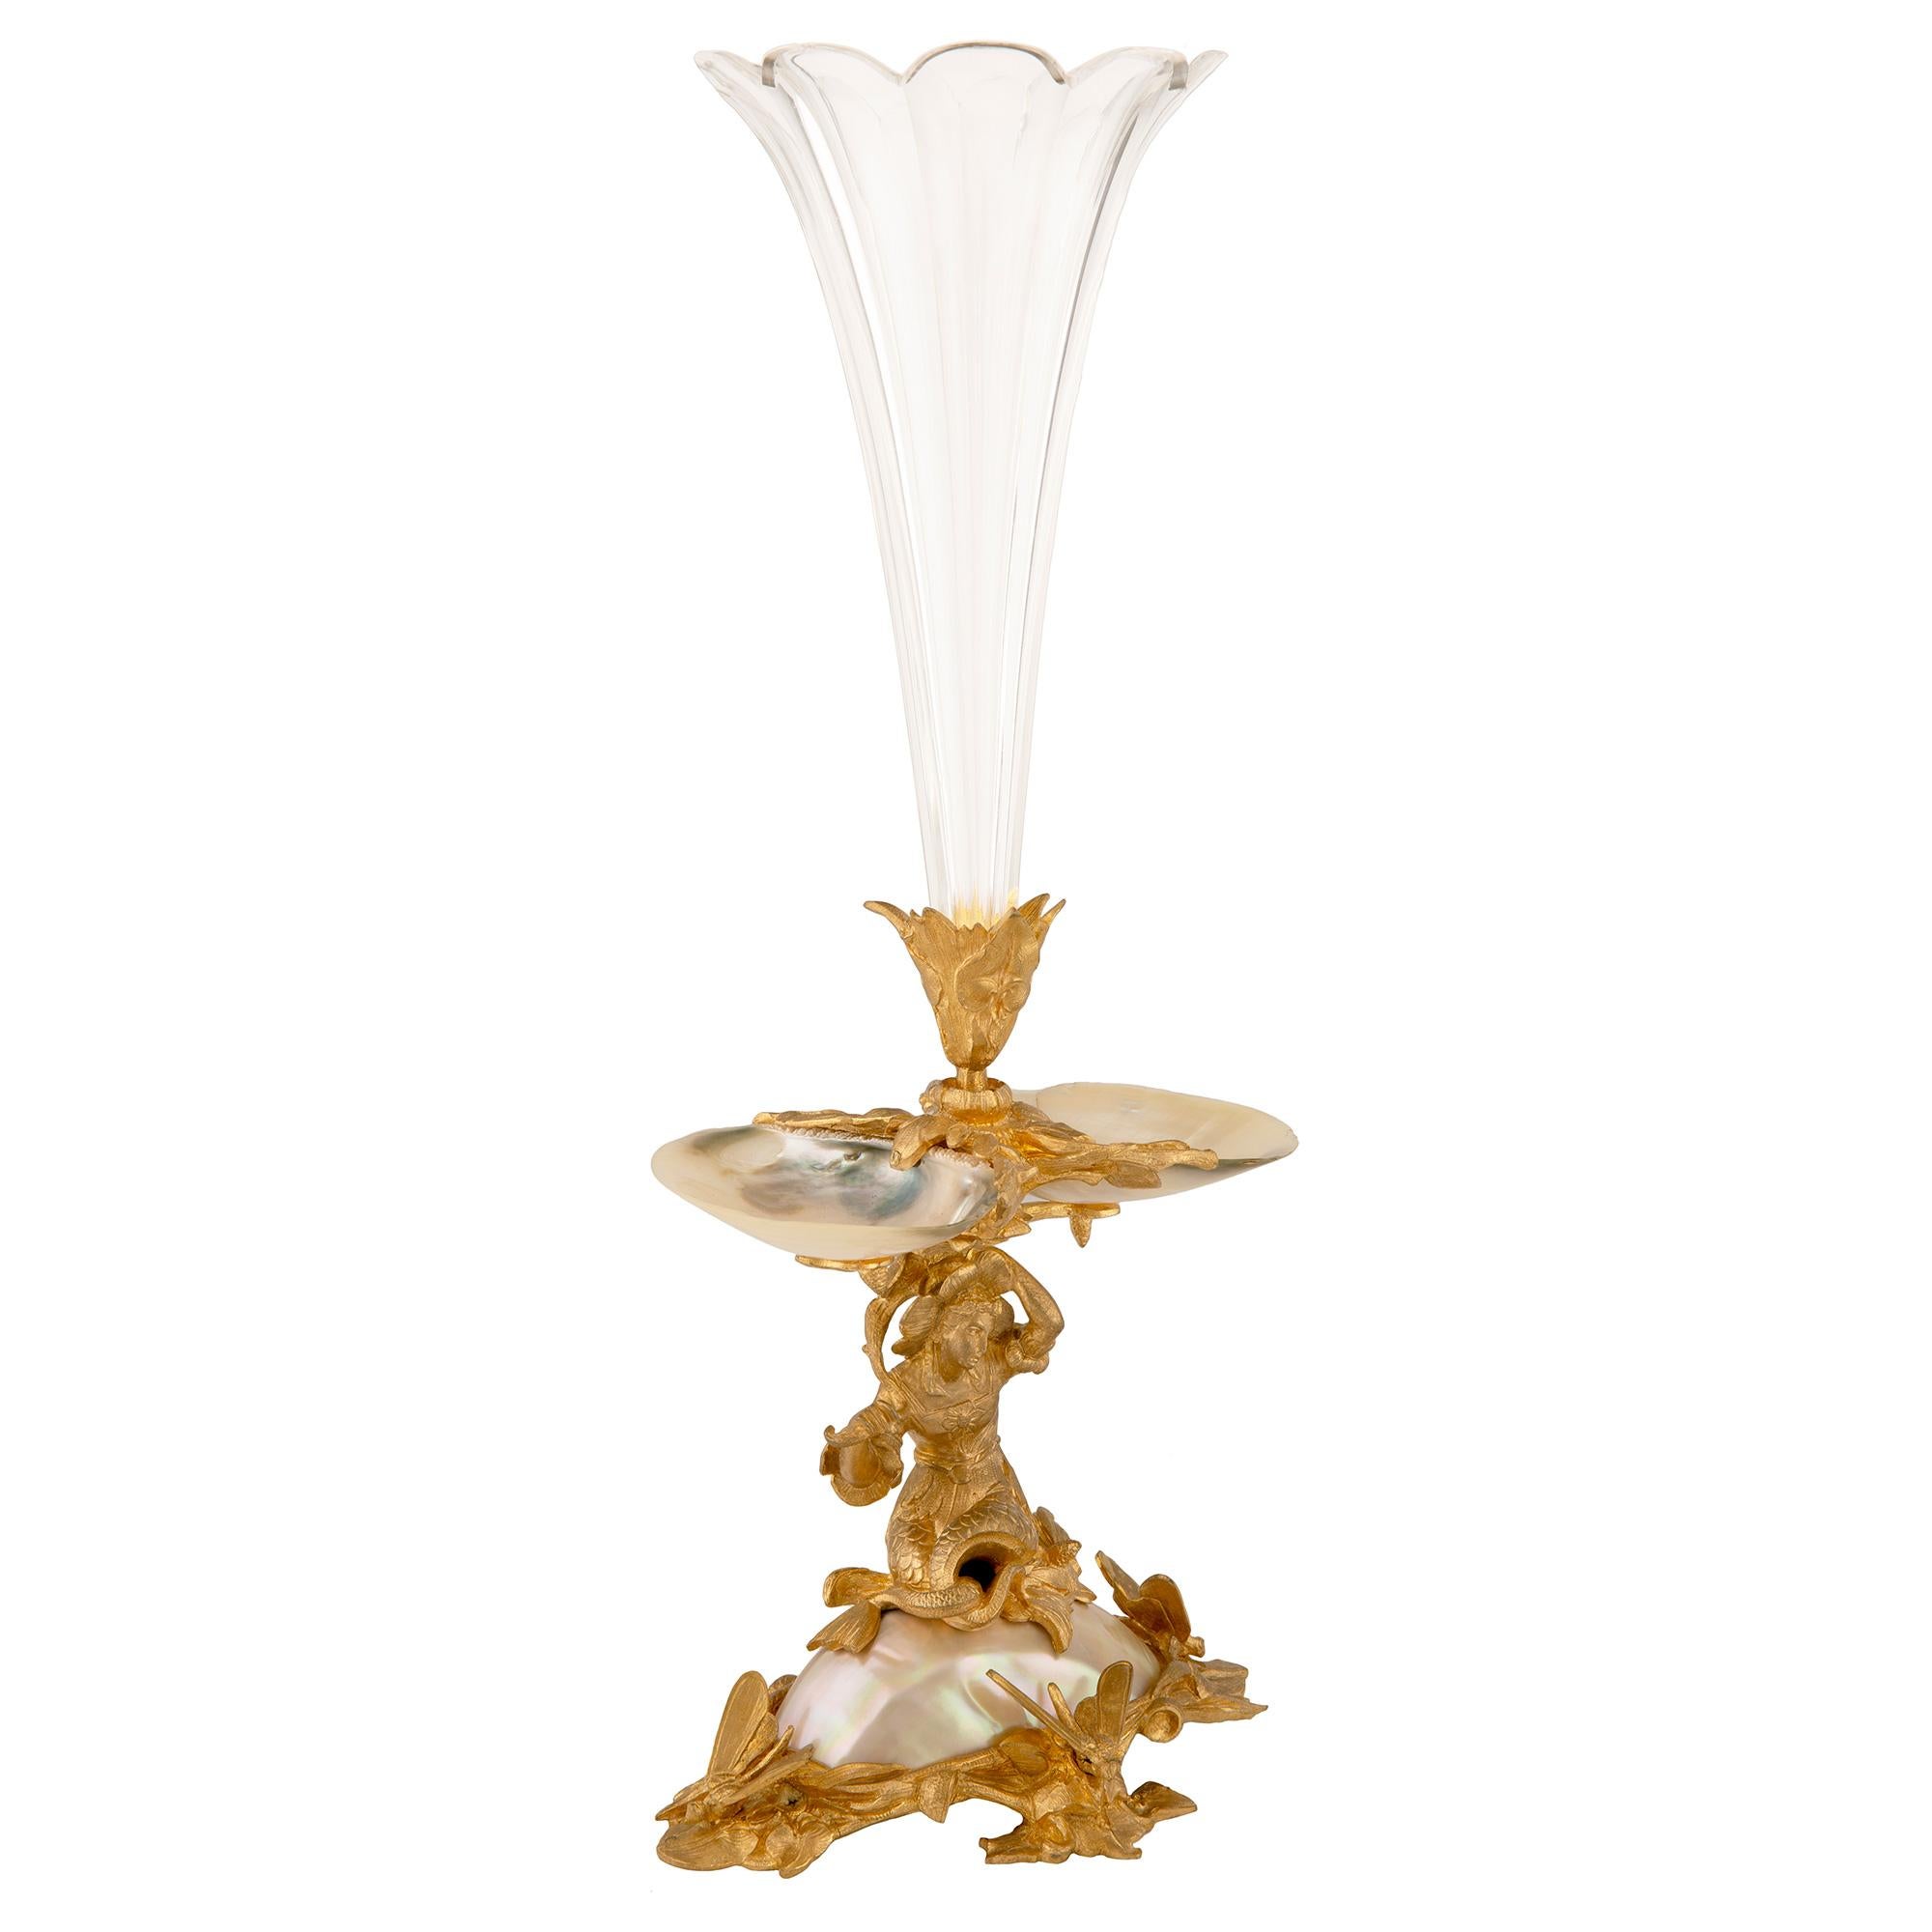 A beautiful French 19th century Louis XVI st. ormolu, Baccarat crystal and mother of pearl vase. The vase is raised by a most impressive and wonderfully executed base with beautiful rock and foliate designs, charming dragon flies and a most